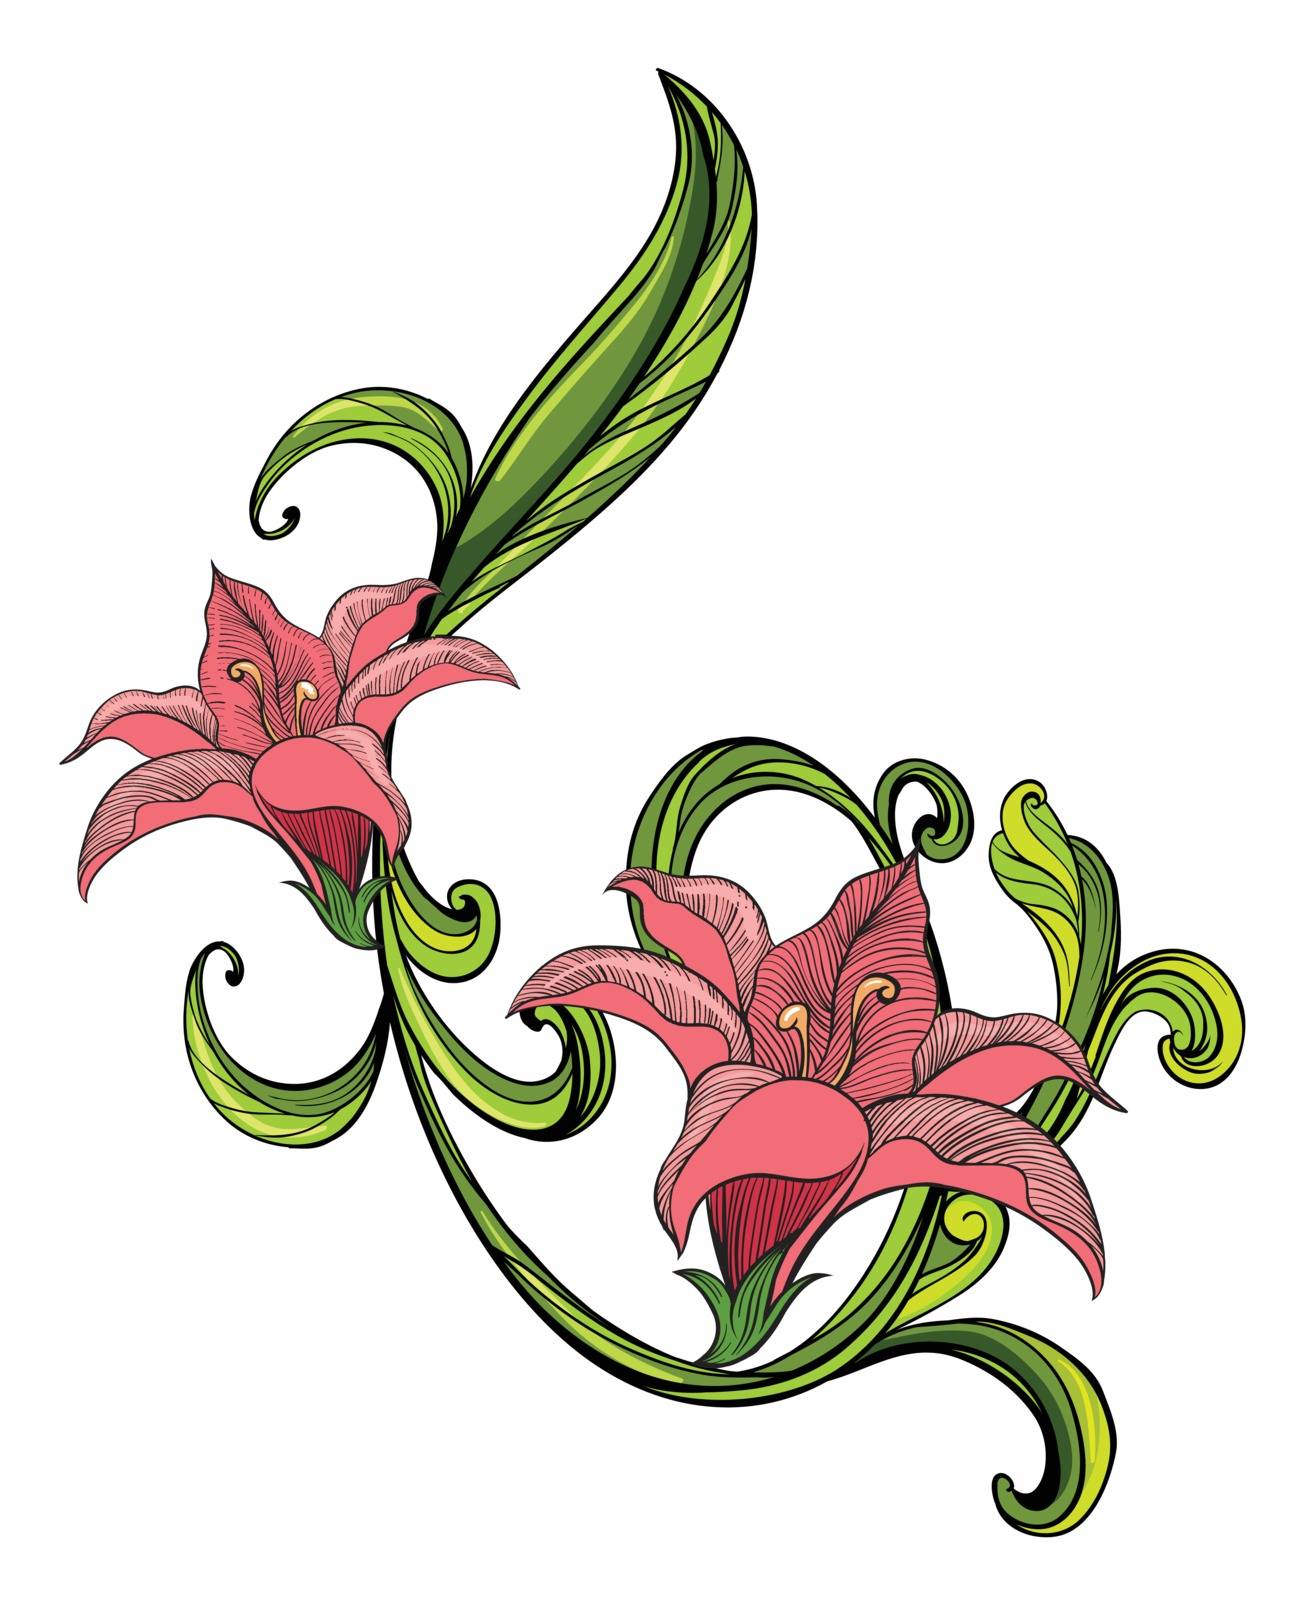 Illustration of a pink and green border on a white background